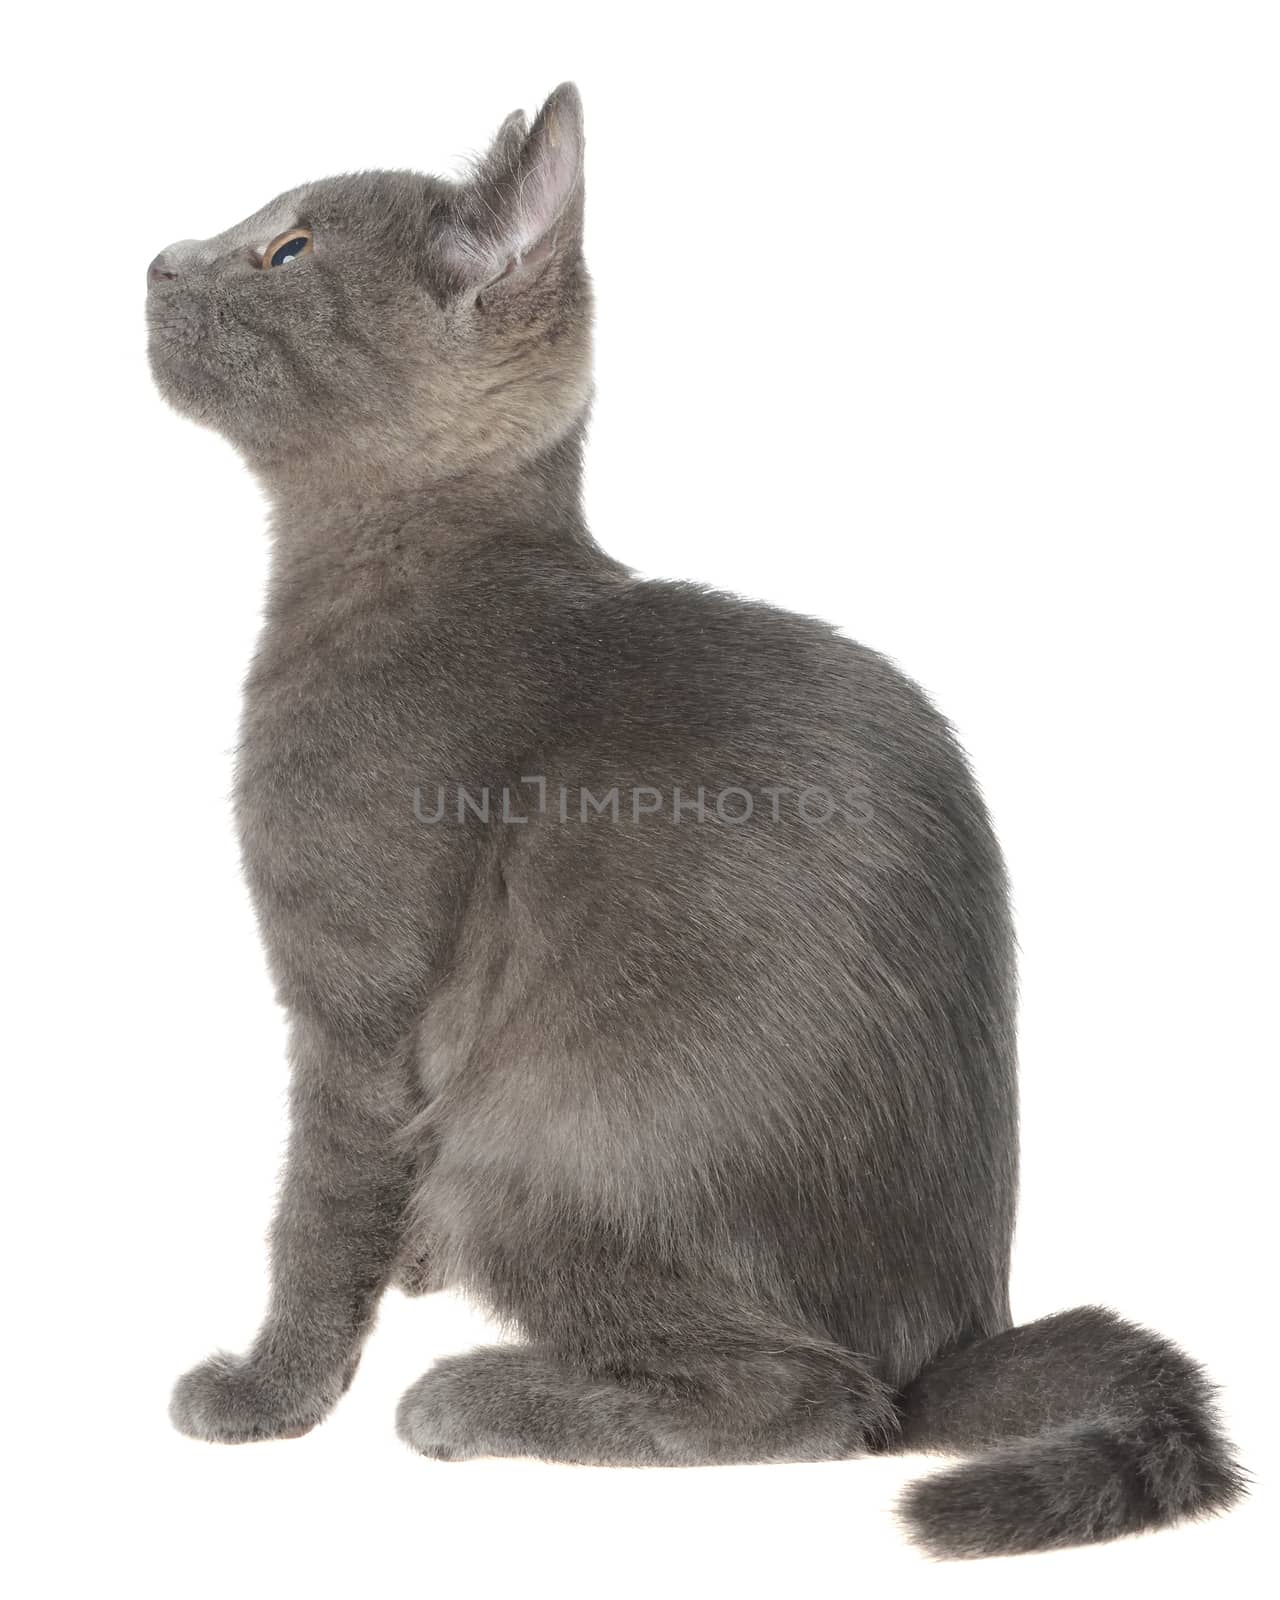 Small gray shorthair kitten sitting isolated on white background.